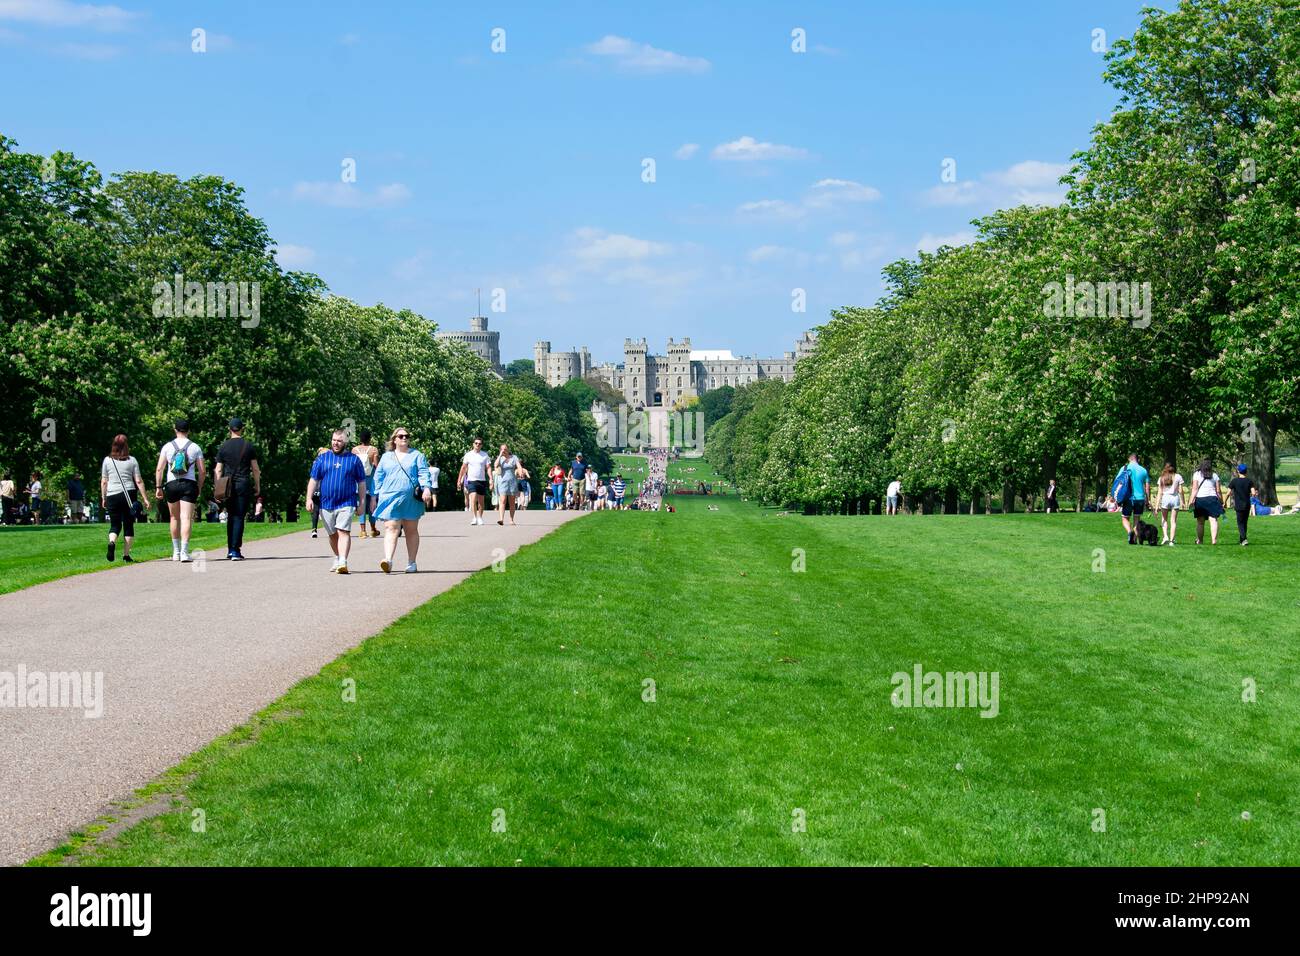 Visitors stroll along The Long Walk, a tree lined road and pathway that leads to the upper ward pf Windsor Castle, Berkshire, England. Stock Photo